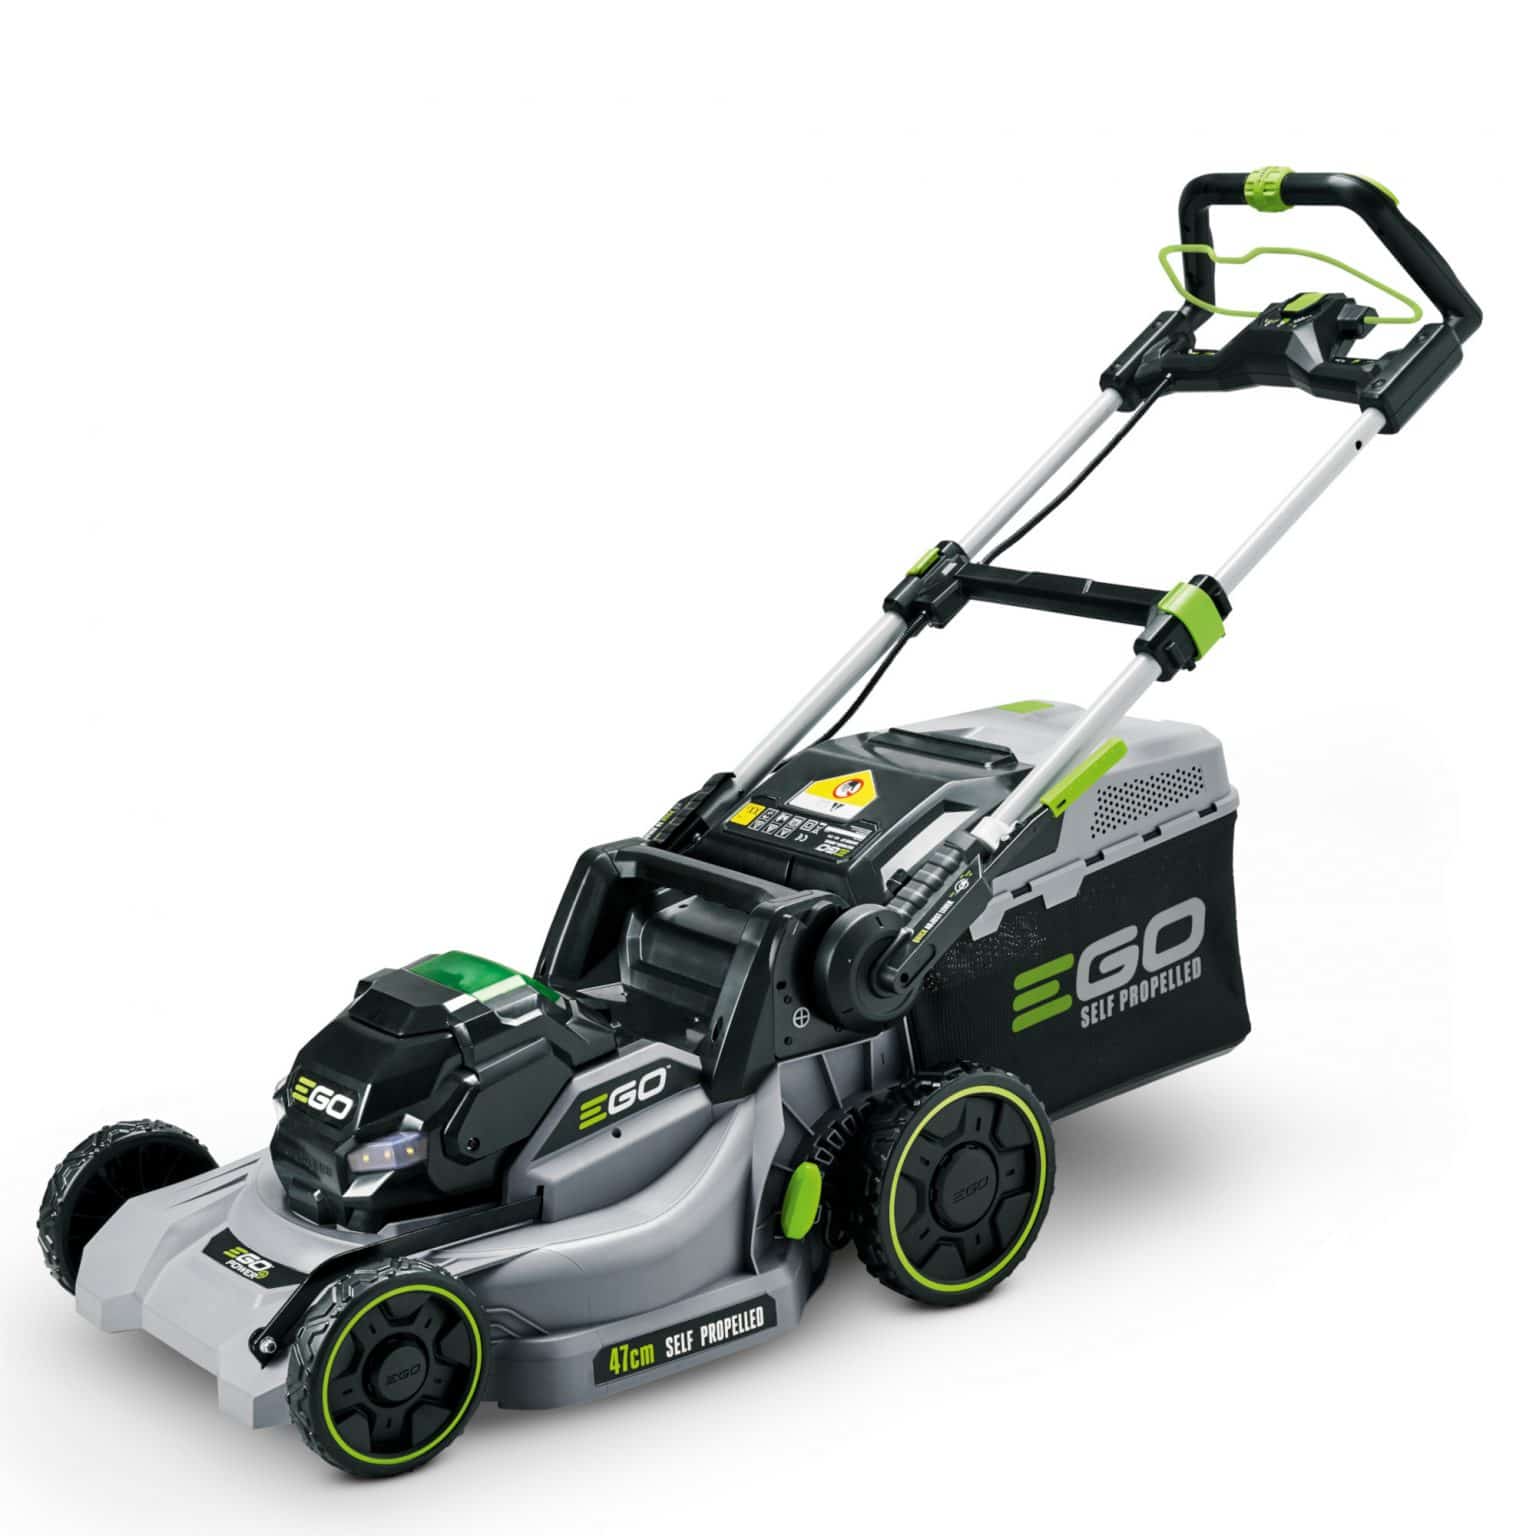 EGO LM1900E-SP Cordless Lawnmower